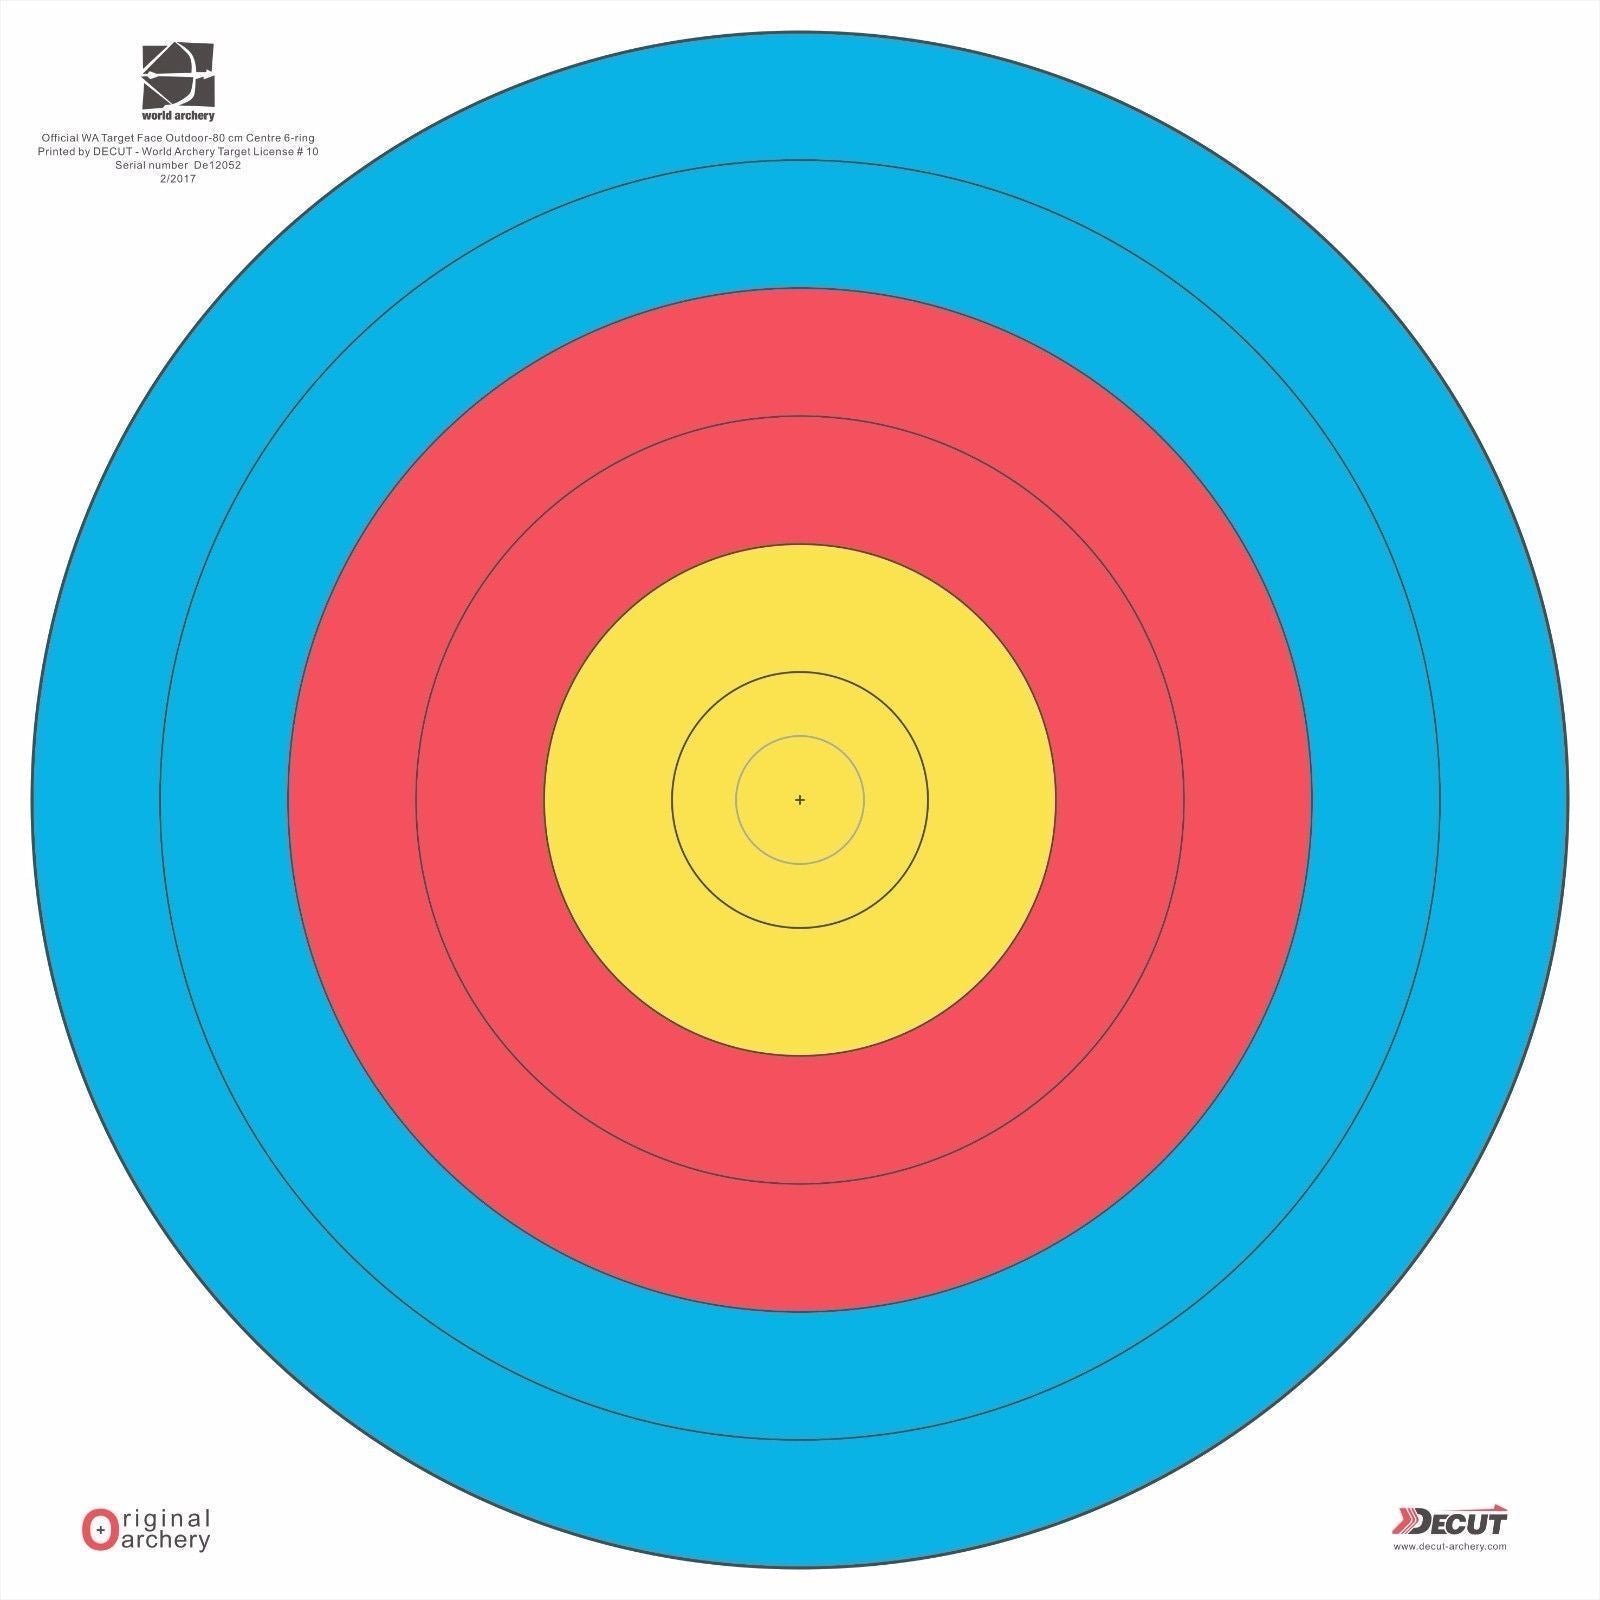 Decut World Archery Approved Waterproof Polyester Target Faces-Canada Archery Online